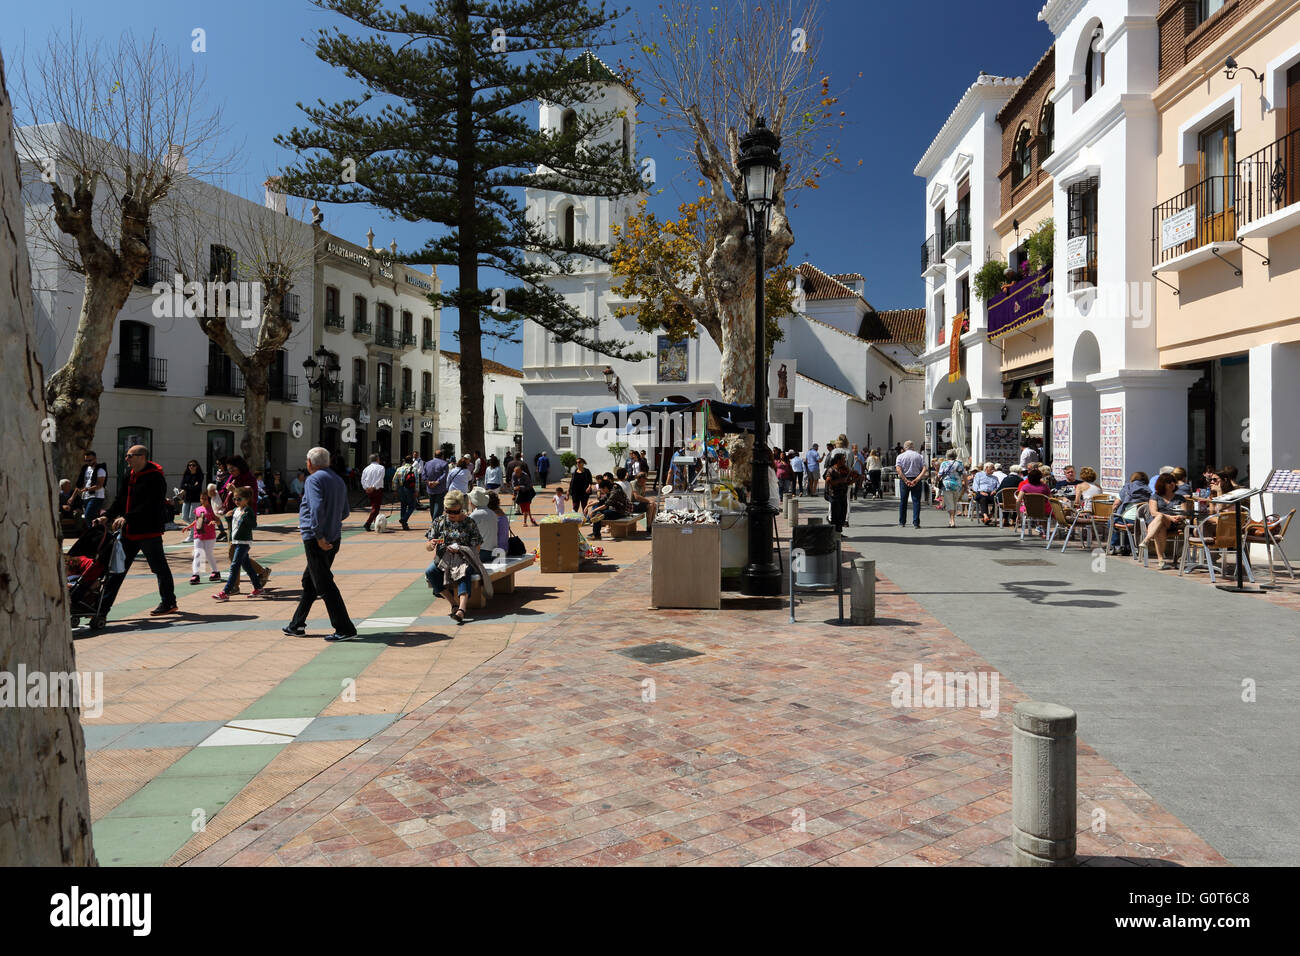 Plaza at the top of the Balcon de Europa in Nerja, Spain Stock Photo